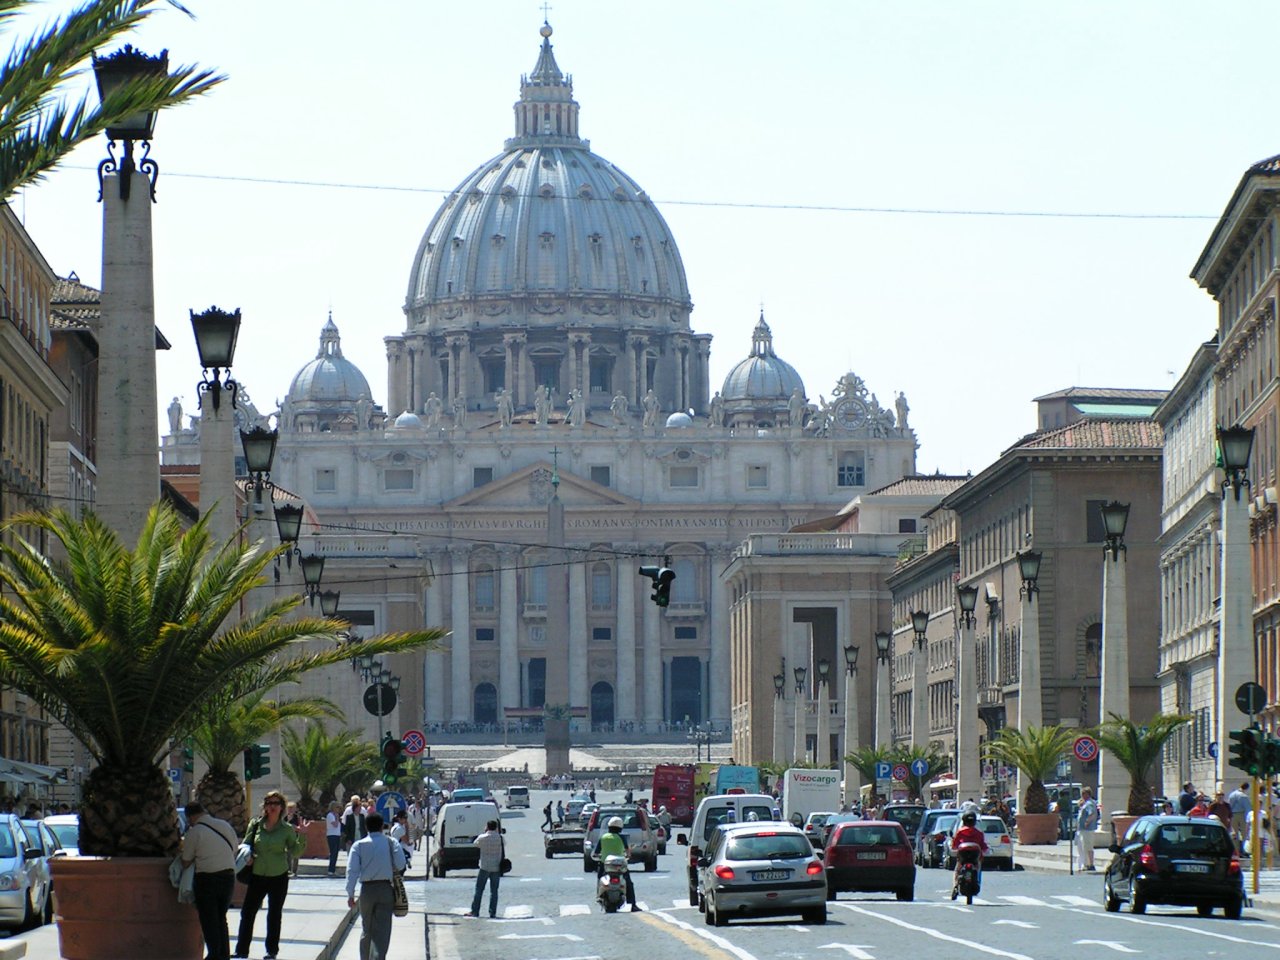 St. Peter’s Basilica, Rome Attractions, Best Places to visit in Rome